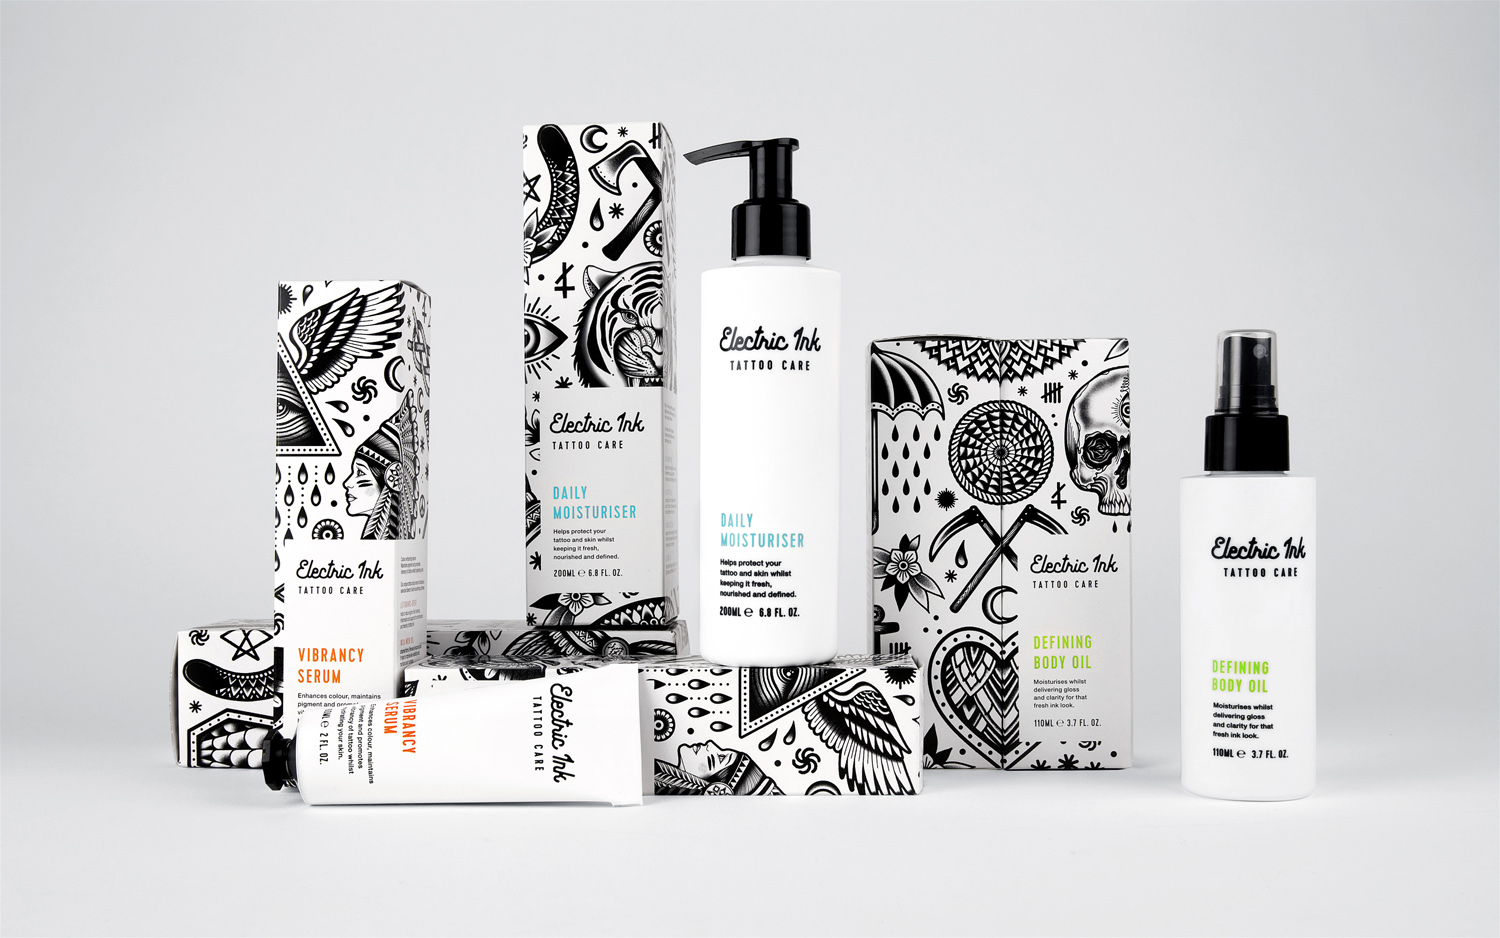 Branding and packaging design for tattoo care range Electric Ink by Leeds-based design studio Robot Food.